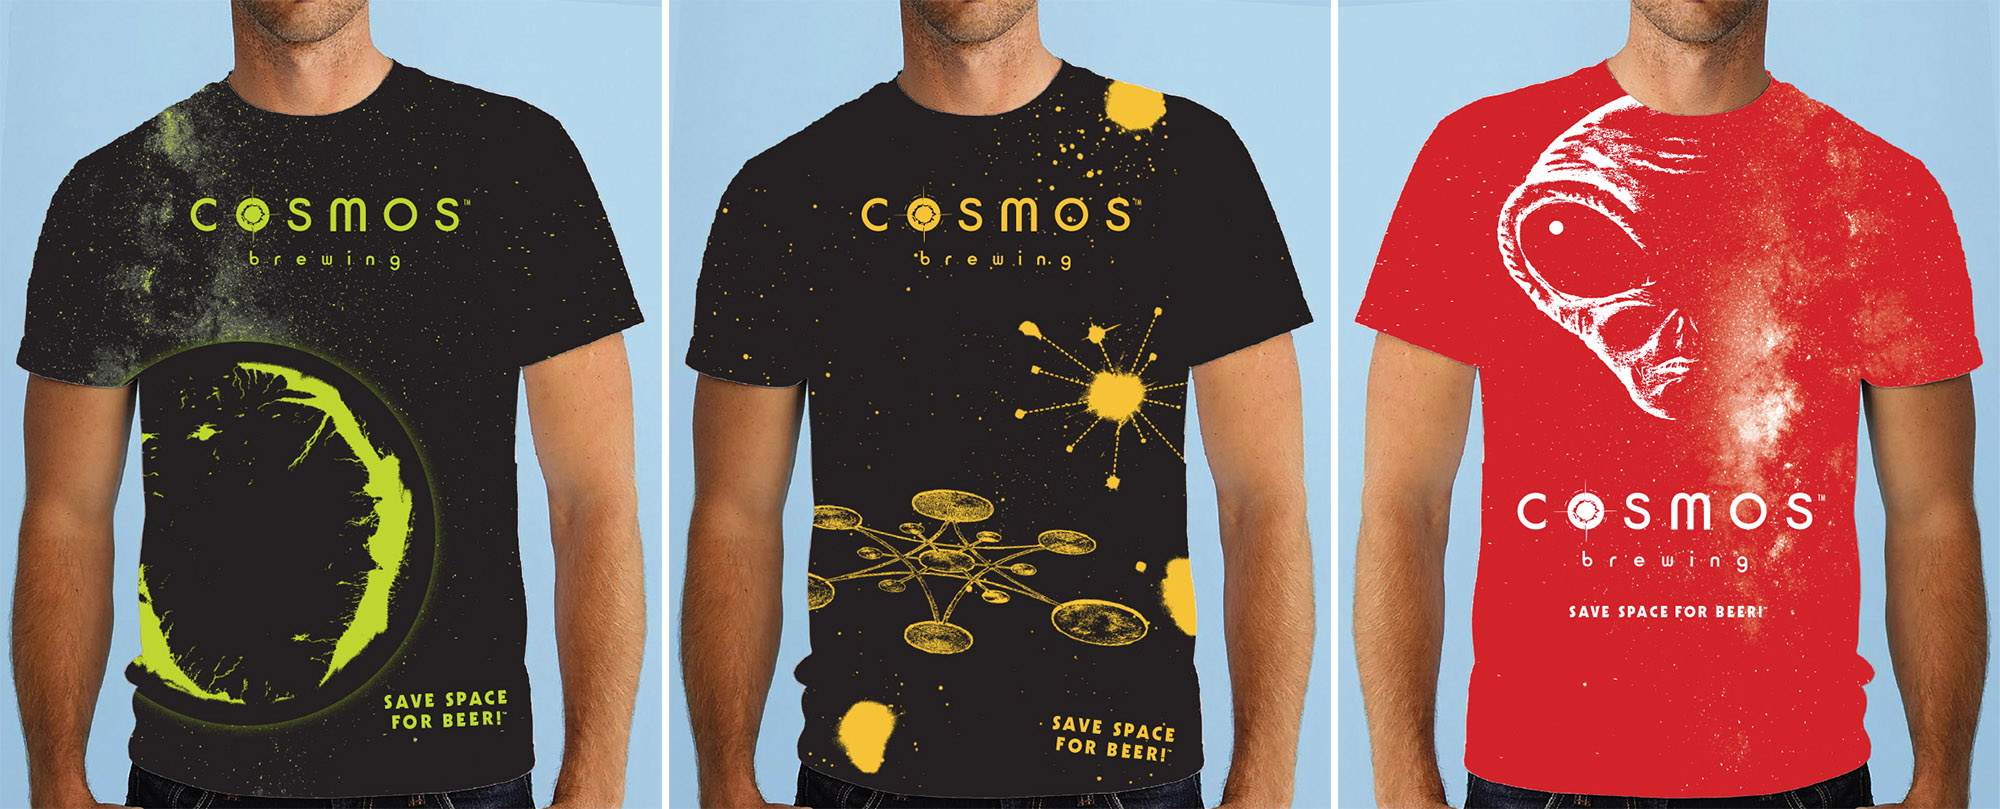 twin cities t-shirt design for cosmos brewing - planet, crop formation, alien